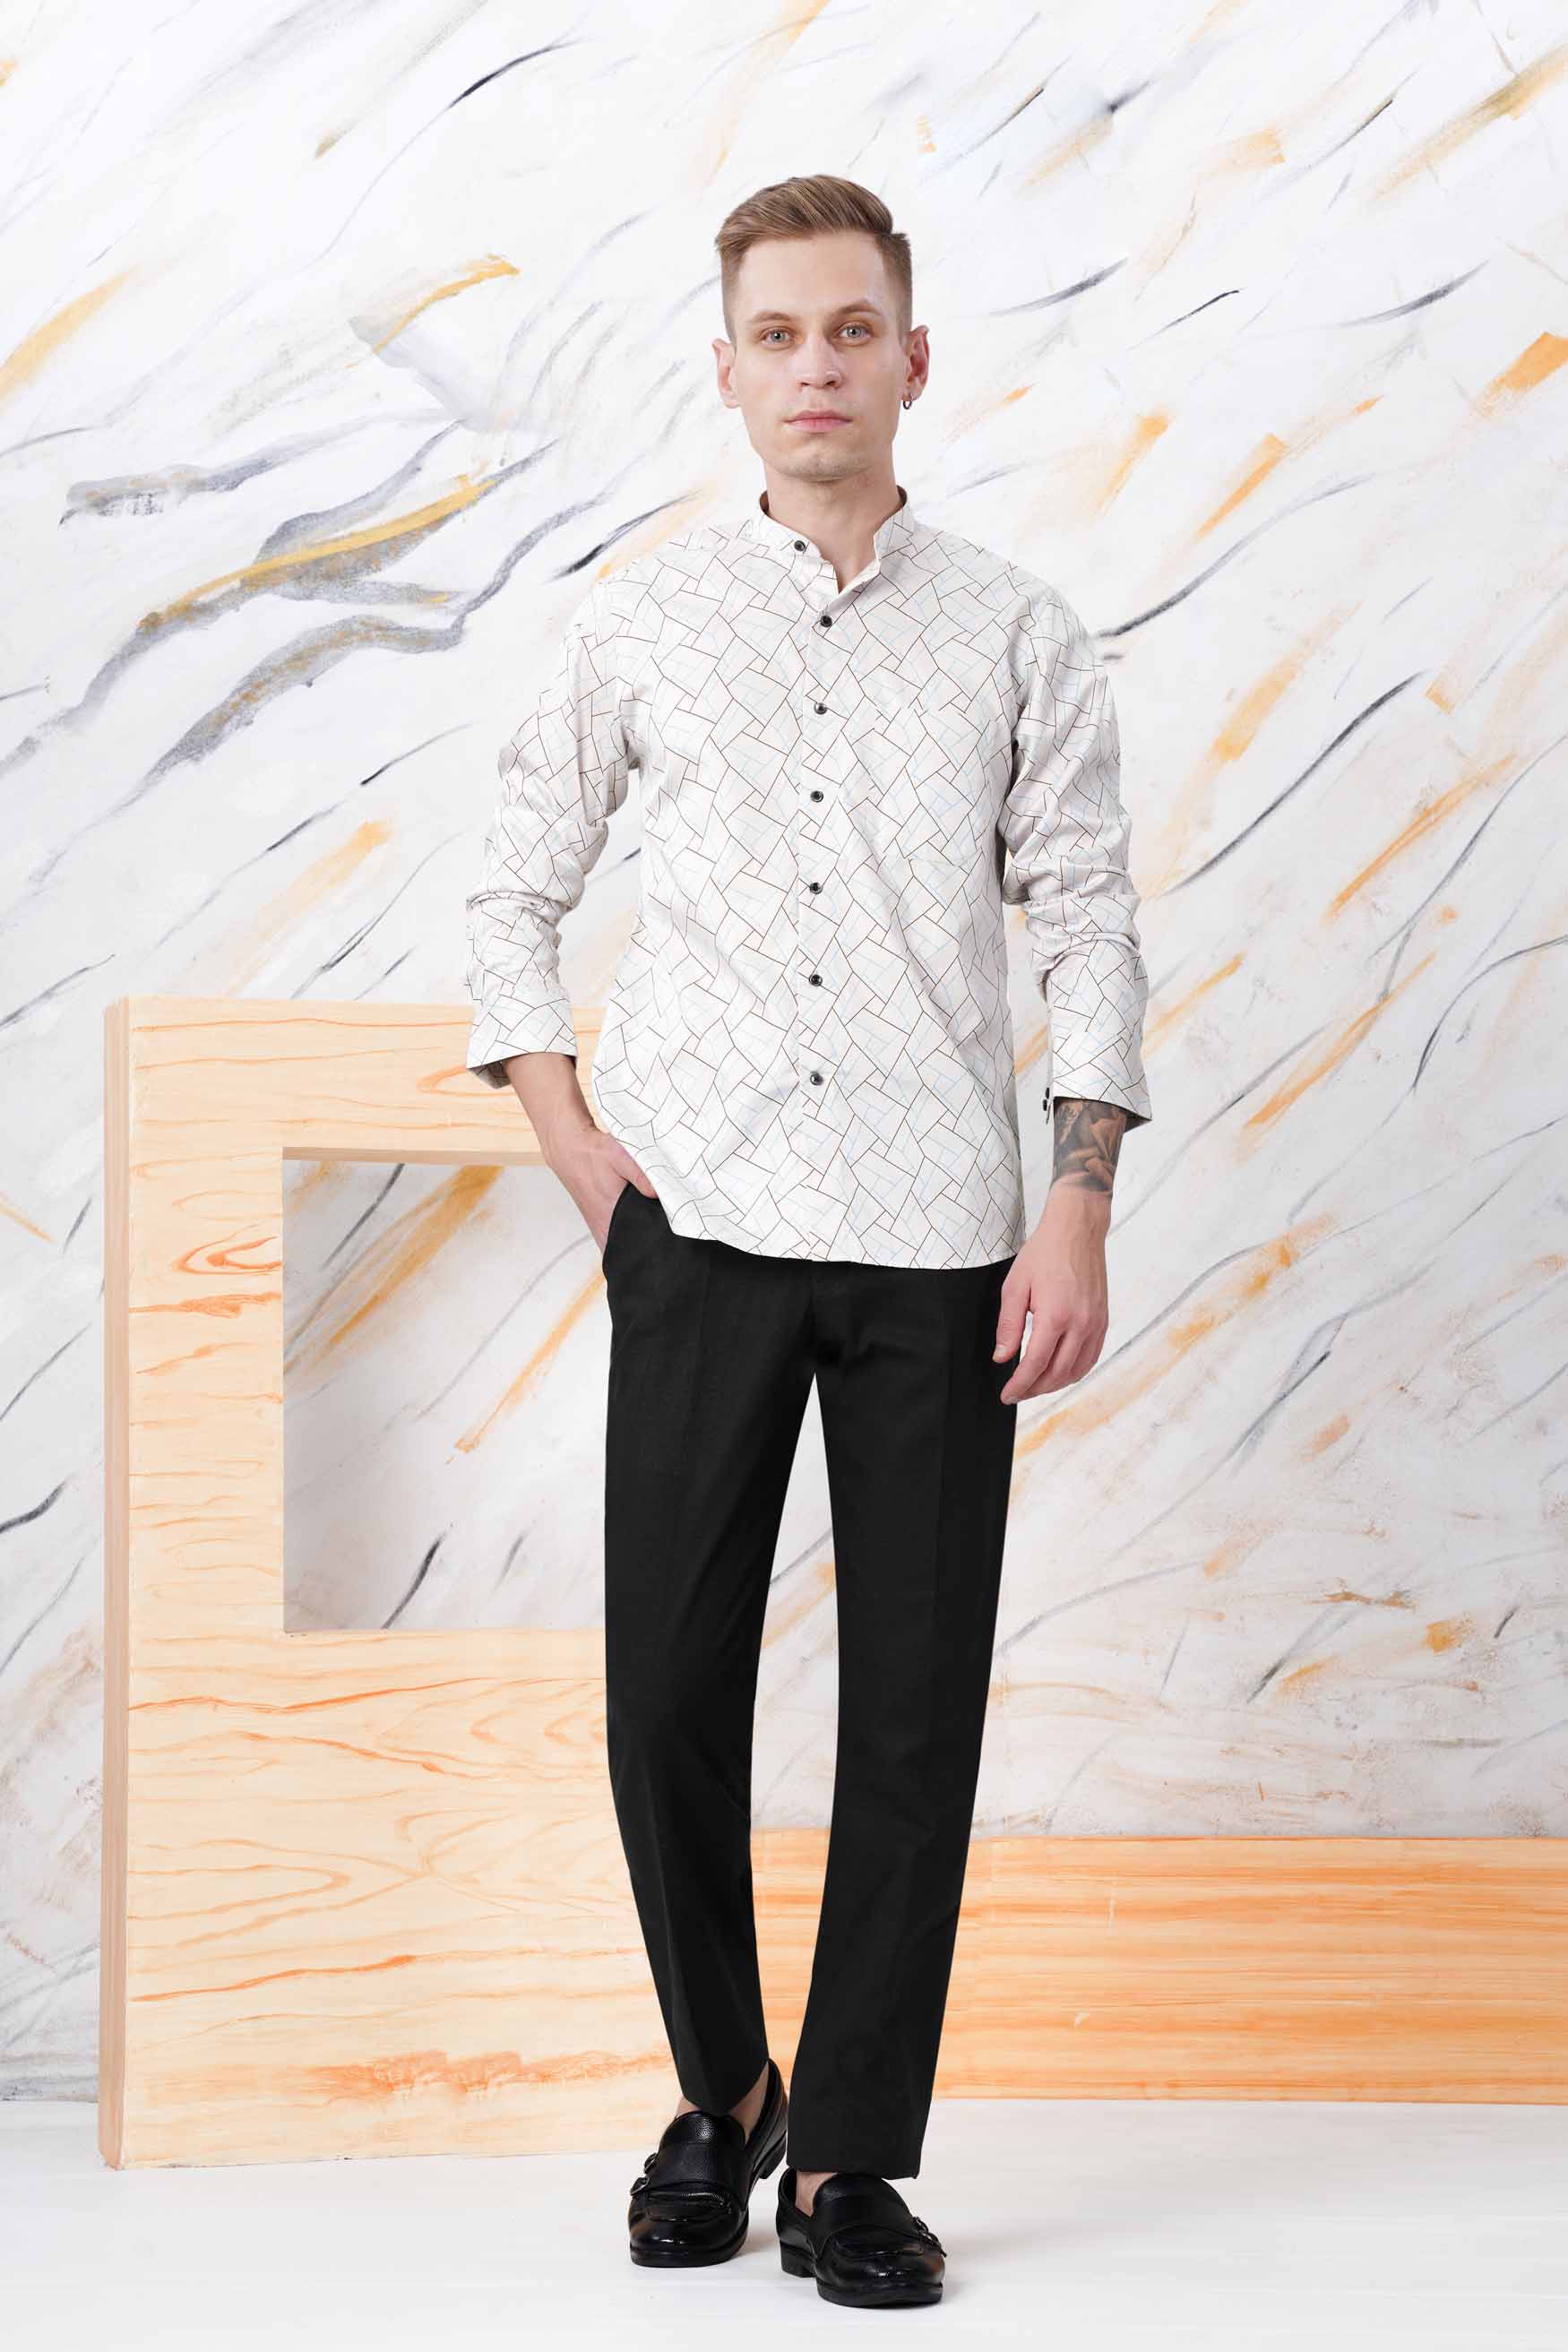 Bright White with Quincy Brown and Carolina Blue Abstract Printed Subtle Sheen Super Soft Premium Cotton Shirt 11576-M-BLK-38, 11576-M-BLK-H-38, 11576-M-BLK-39, 11576-M-BLK-H-39, 11576-M-BLK-40, 11576-M-BLK-H-40, 11576-M-BLK-42, 11576-M-BLK-H-42, 11576-M-BLK-44, 11576-M-BLK-H-44, 11576-M-BLK-46, 11576-M-BLK-H-46, 11576-M-BLK-48, 11576-M-BLK-H-48, 11576-M-BLK-50, 11576-M-BLK-H-50, 11576-M-BLK-52, 11576-M-BLK-H-52